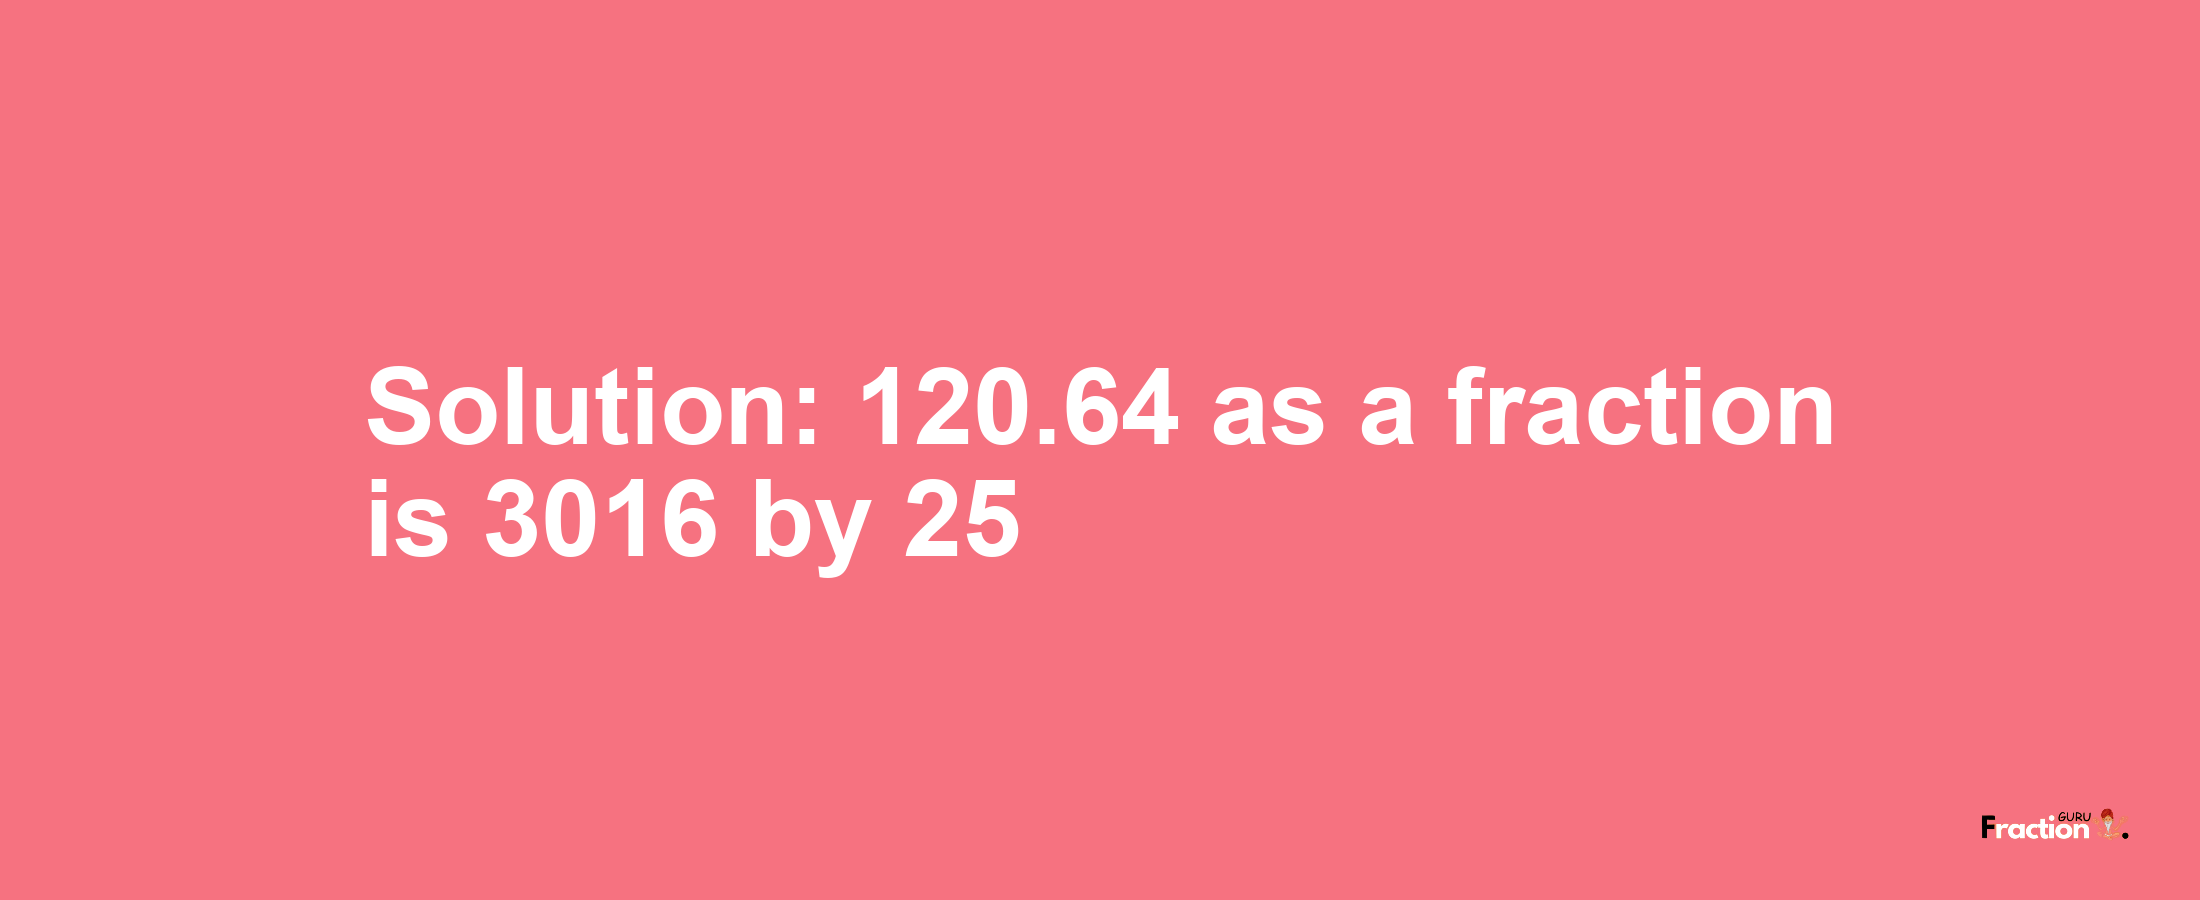 Solution:120.64 as a fraction is 3016/25